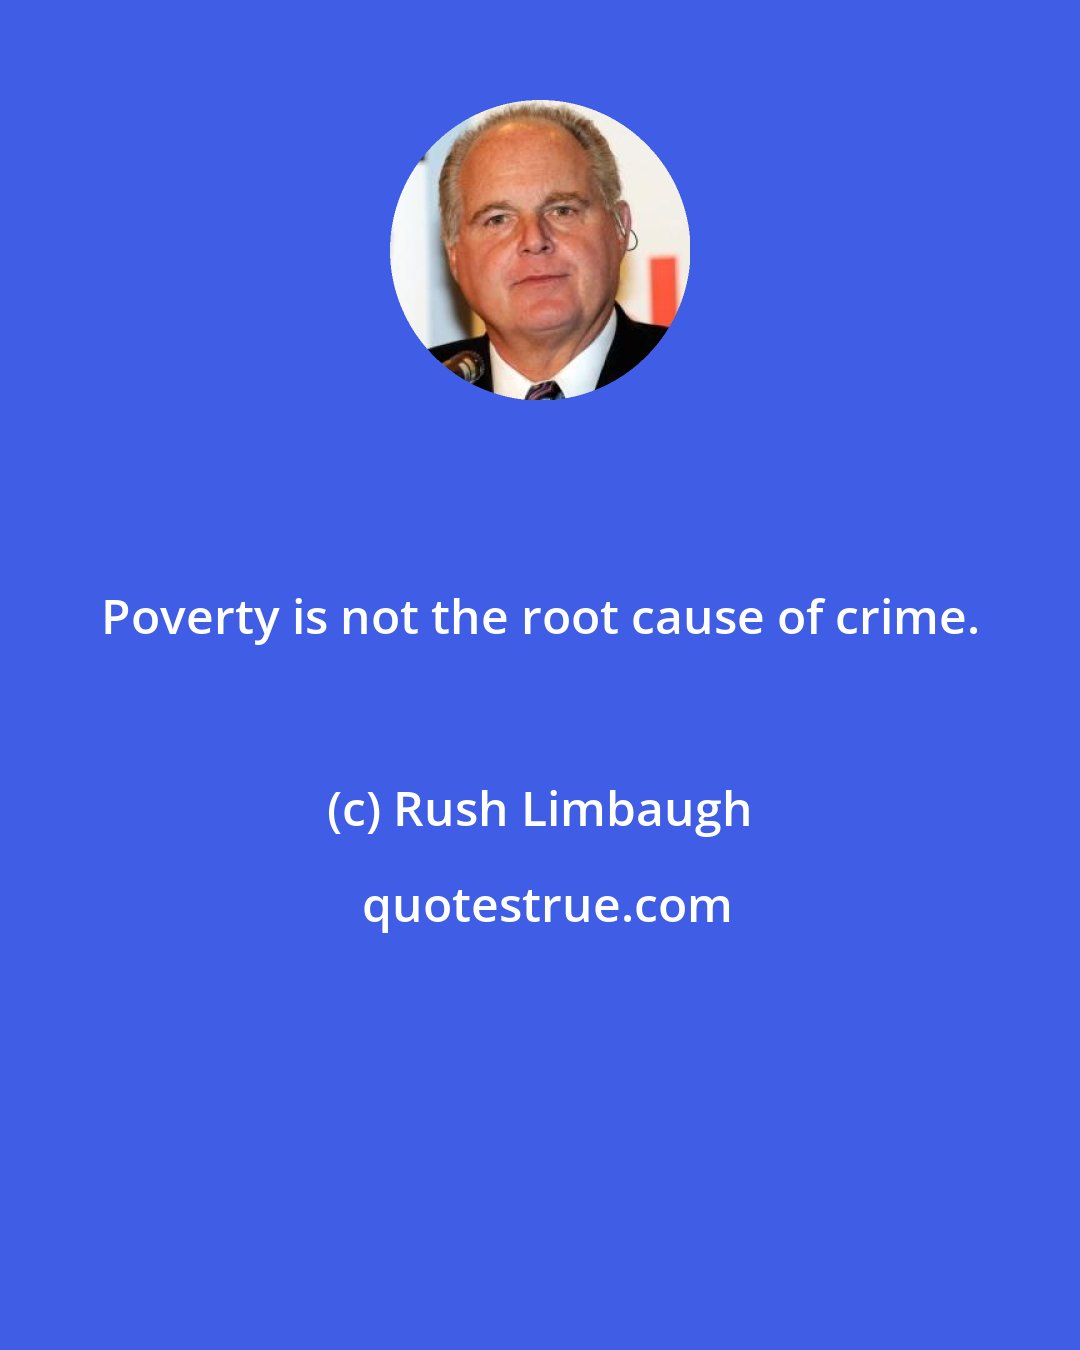 Rush Limbaugh: Poverty is not the root cause of crime.